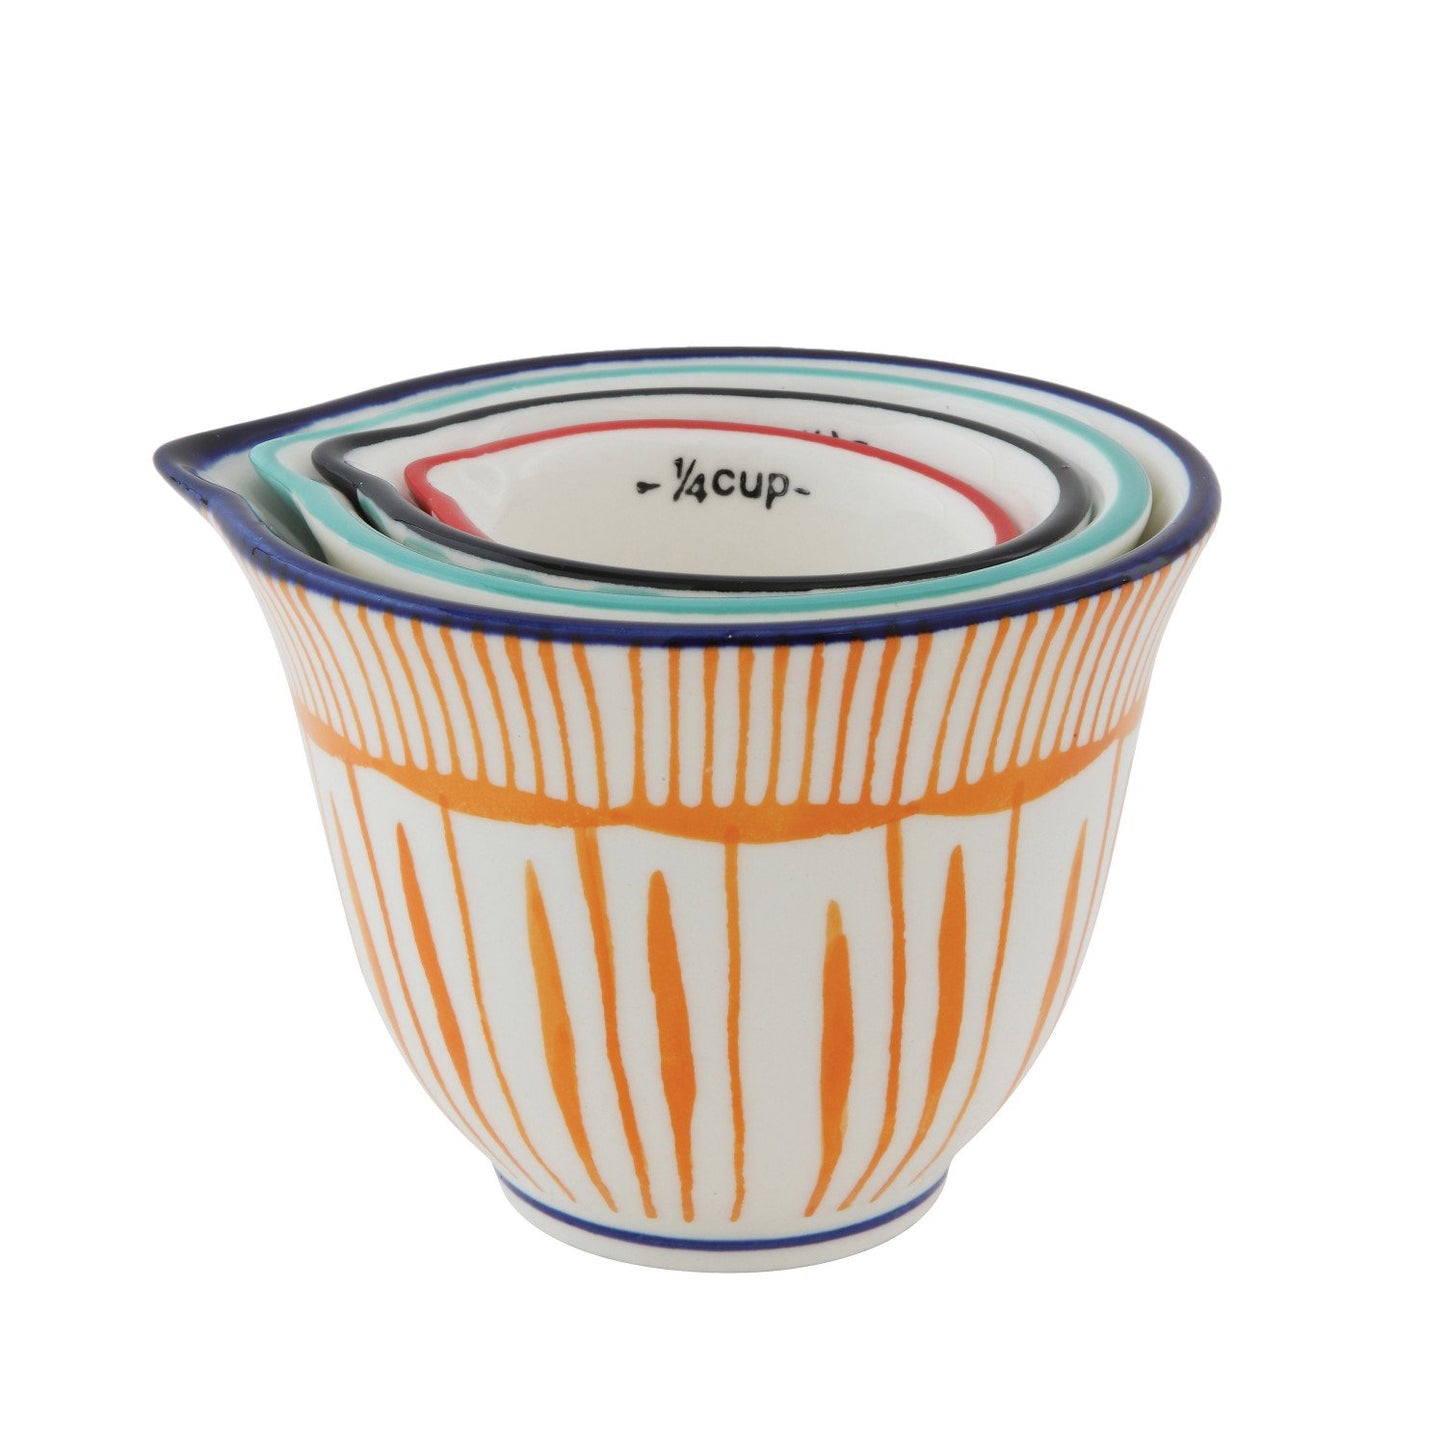 Hand-Stamped Measuring Cups with Stripes